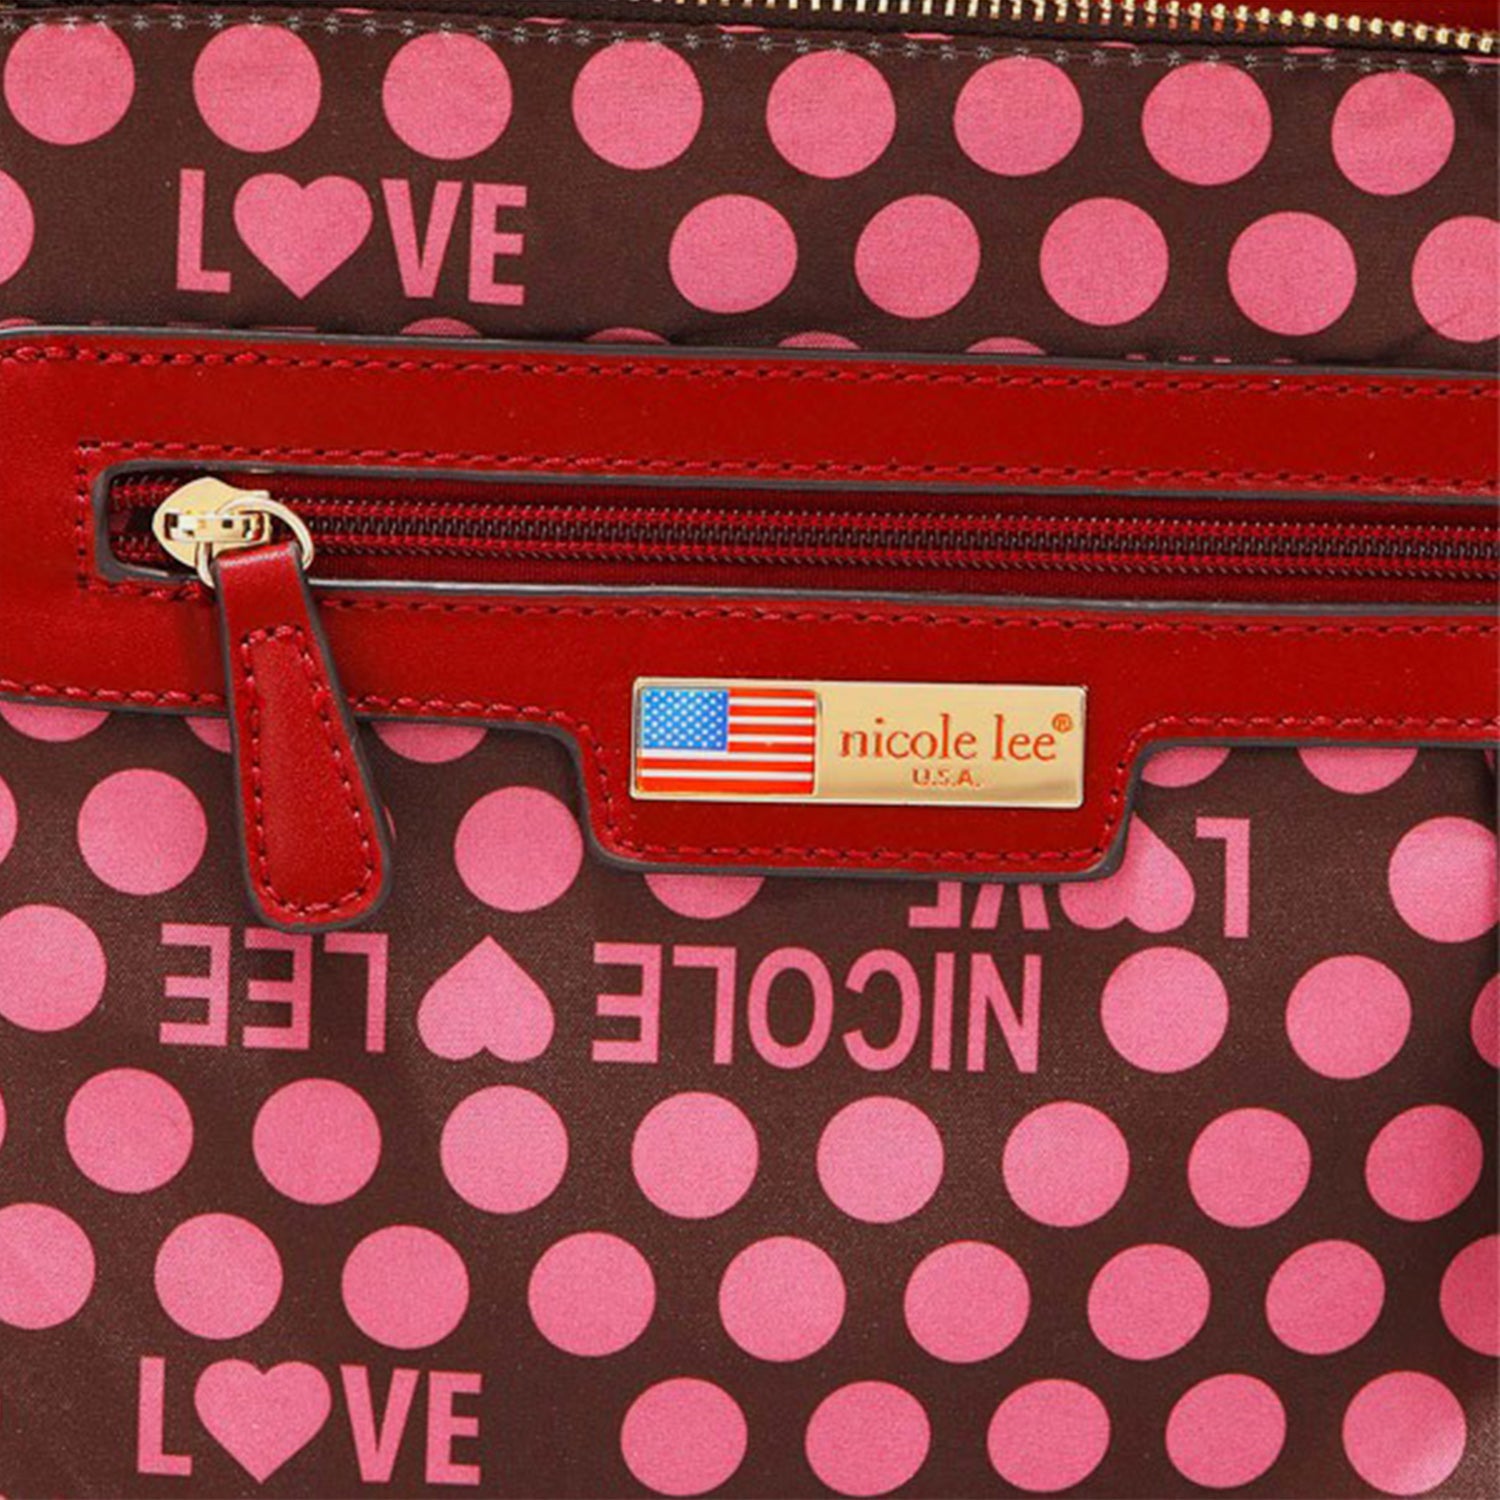 A close-up of an elegant Nicole Lee USA Scallop Stitched Handbag from Marianela's Exclusive Shop, LLC, featuring pink polka dots and the word "LOVE" written in pink. It includes a red zipper pocket with a red leather tag above it, showcasing an American flag and the text "nicole lee® U.S.A." in gold.